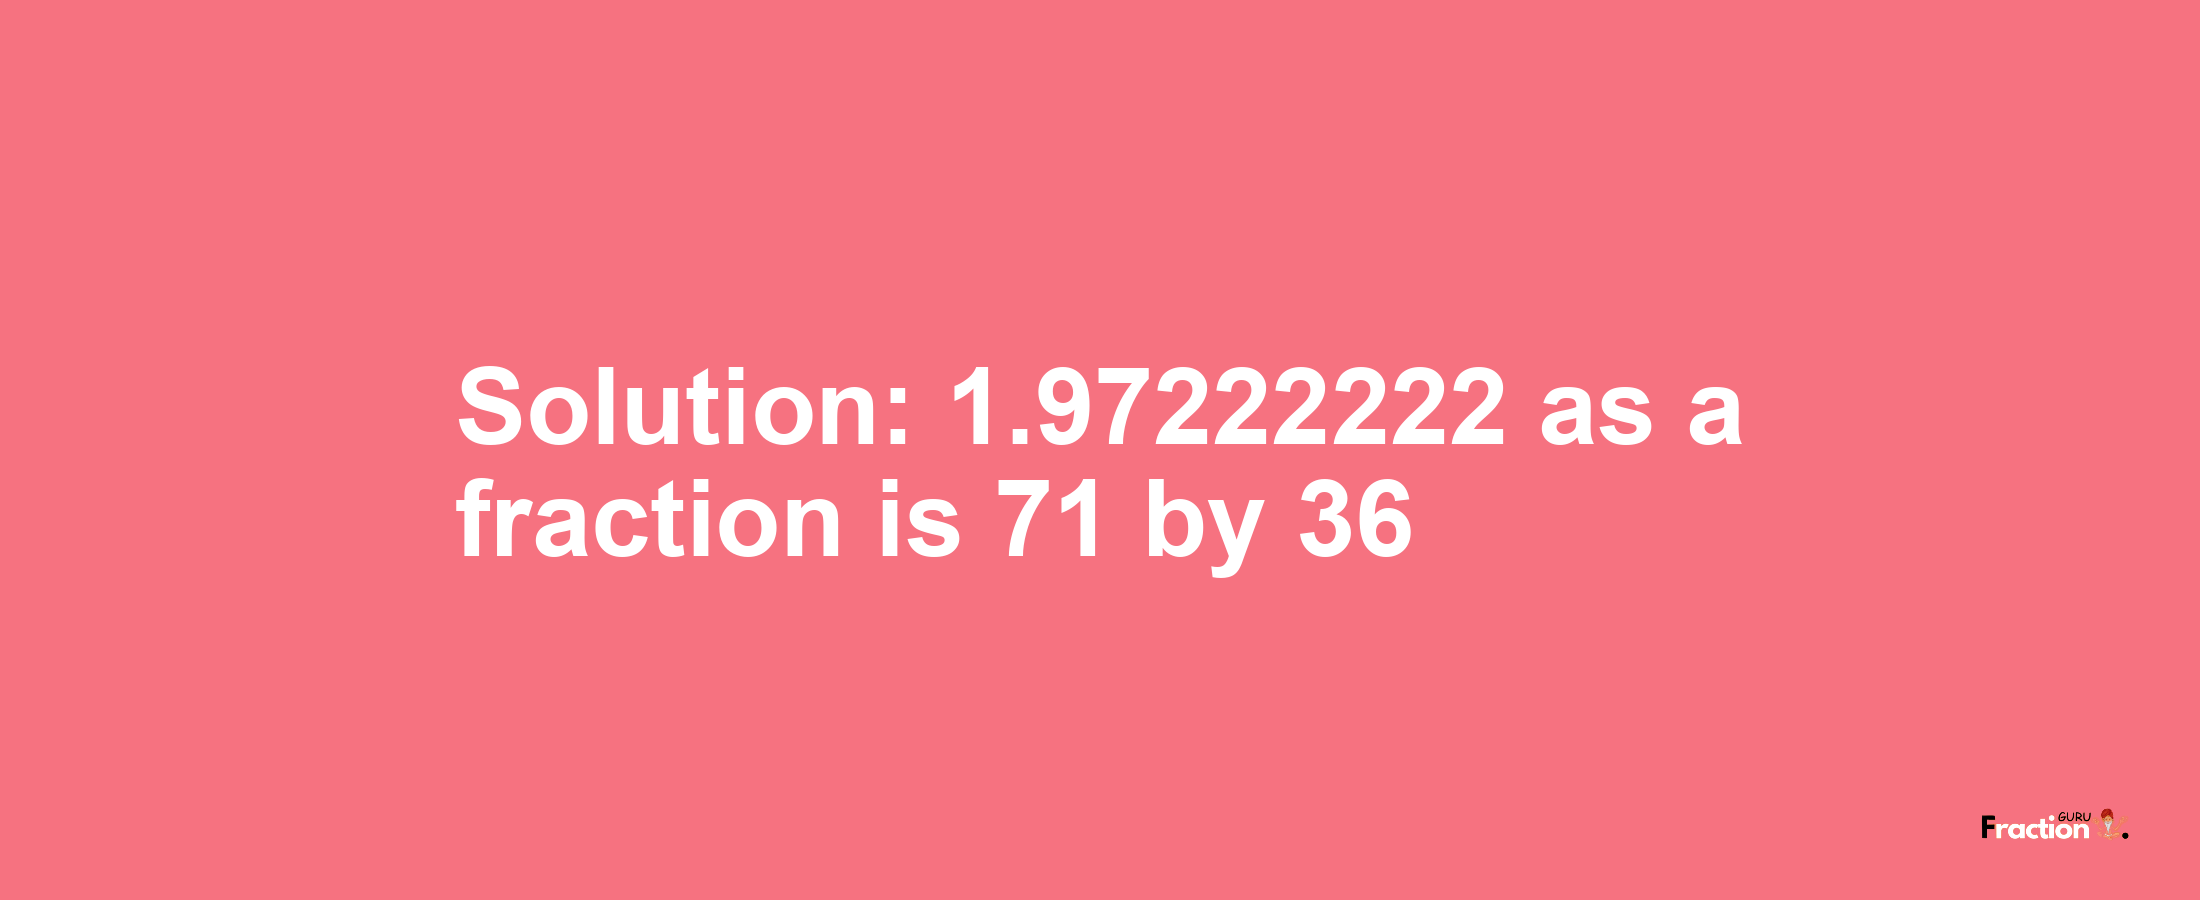 Solution:1.97222222 as a fraction is 71/36